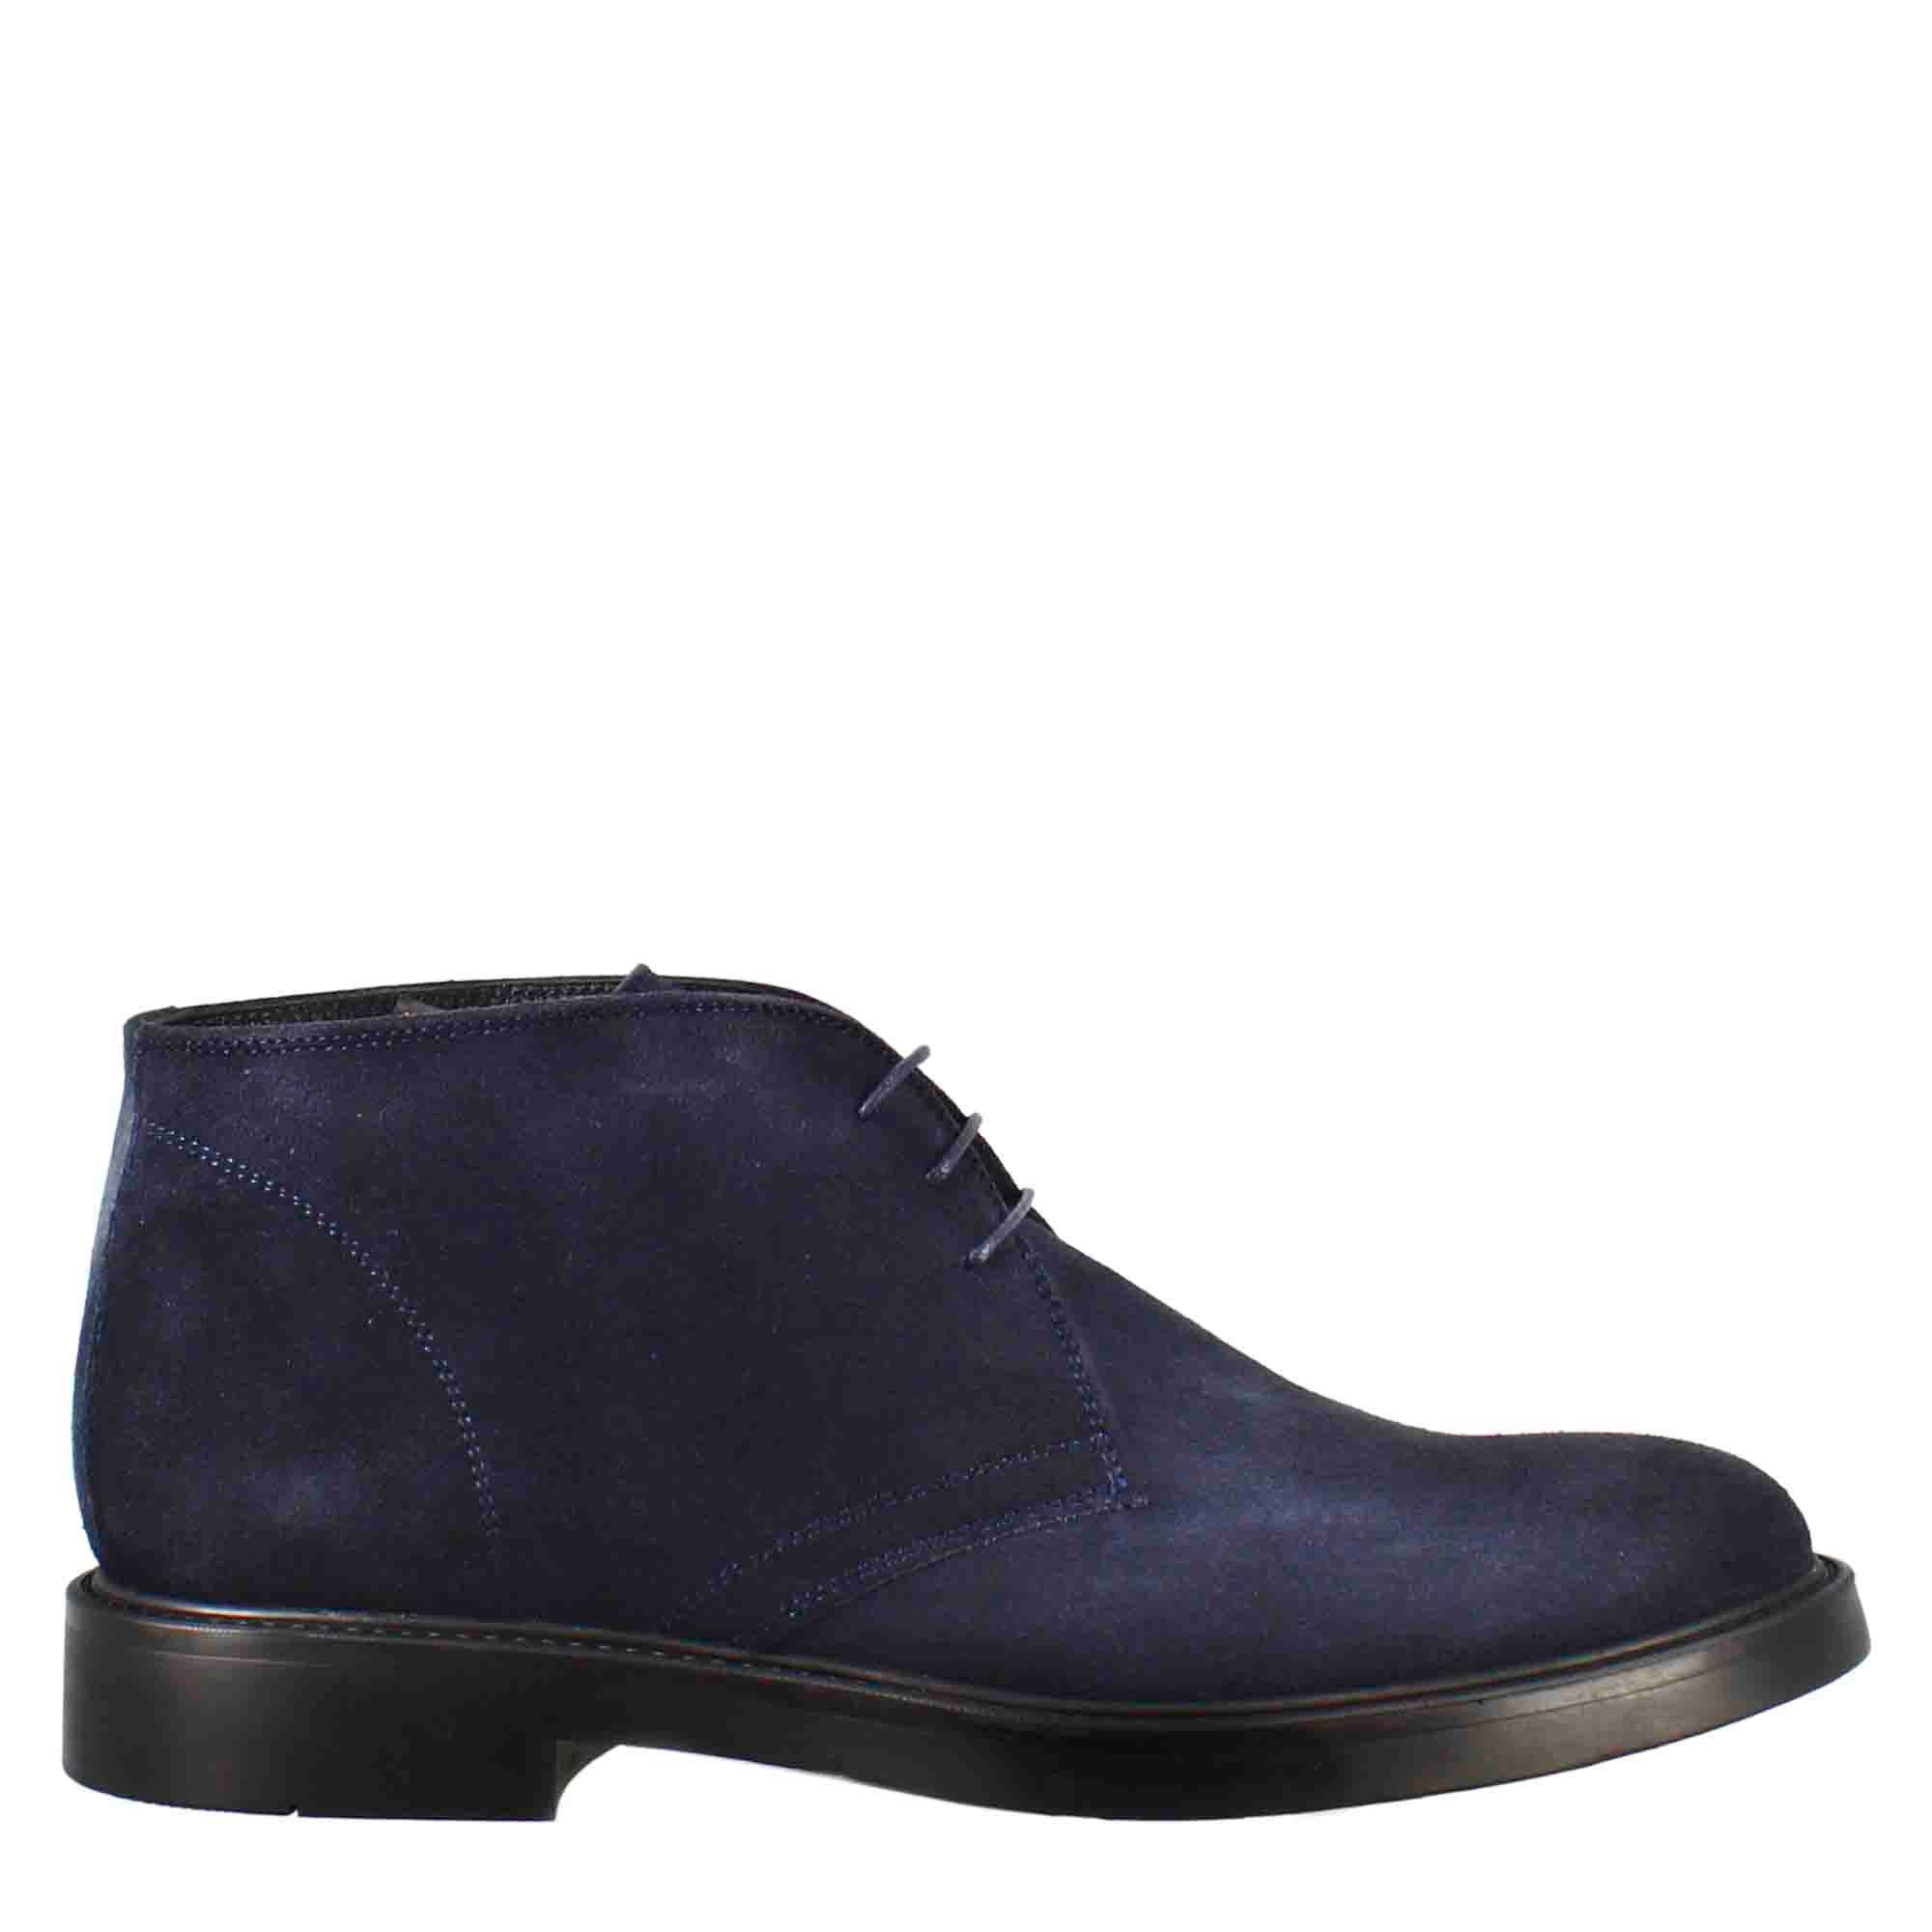 Dark Blue Suede Leather Ankle Boots